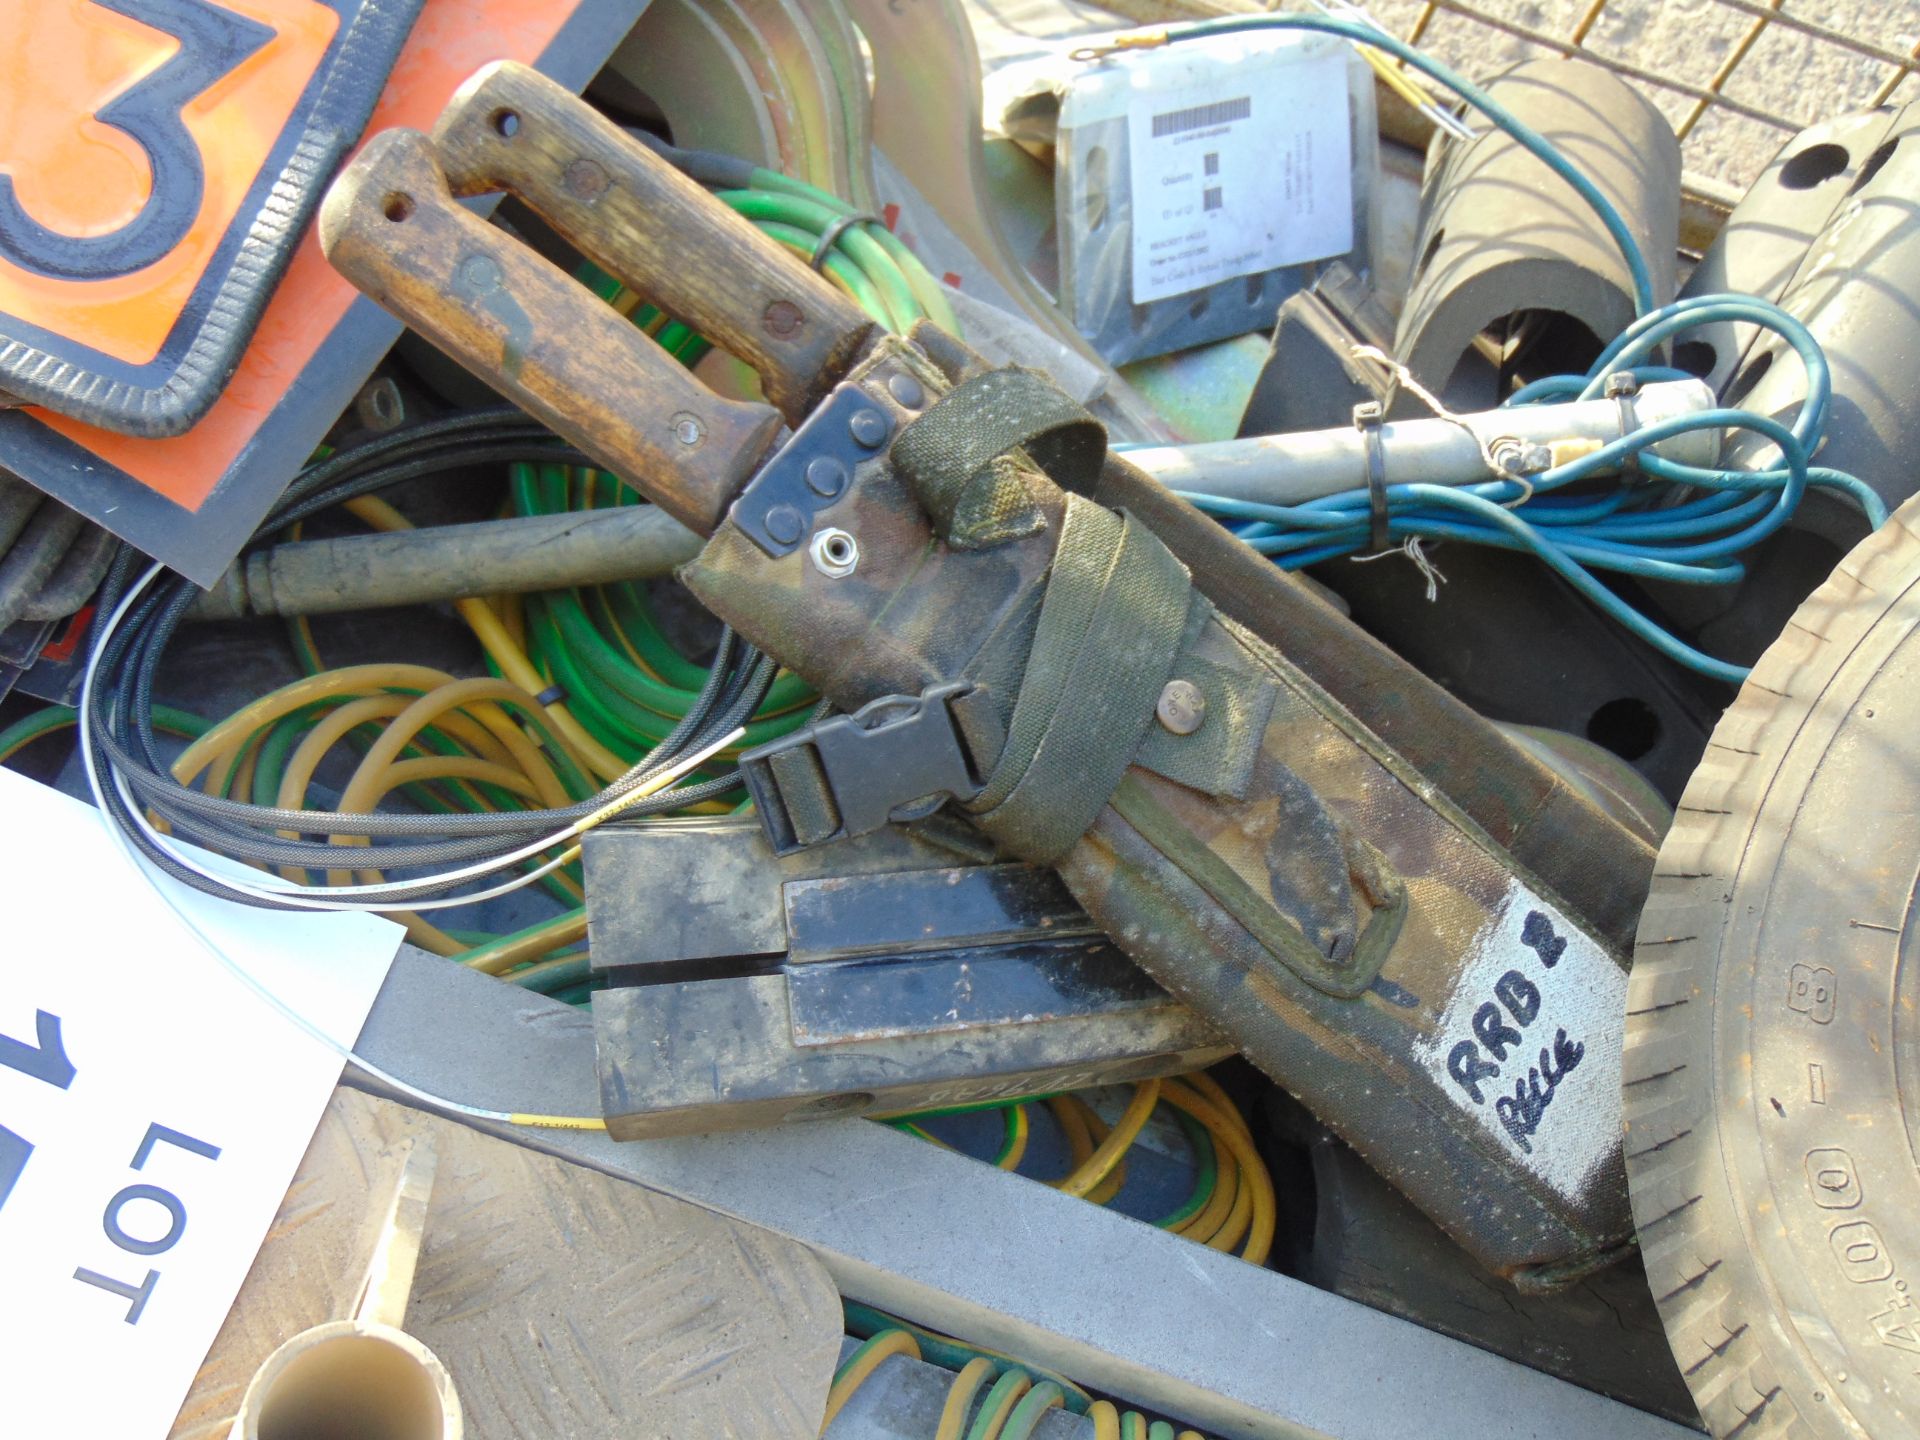 1X STILLAGE OF VEHICLES SPARES INCLUDING ANTENNA BASES, WIRING HARNESS, MARKER BOARDS, ETC,ETC - Image 3 of 8